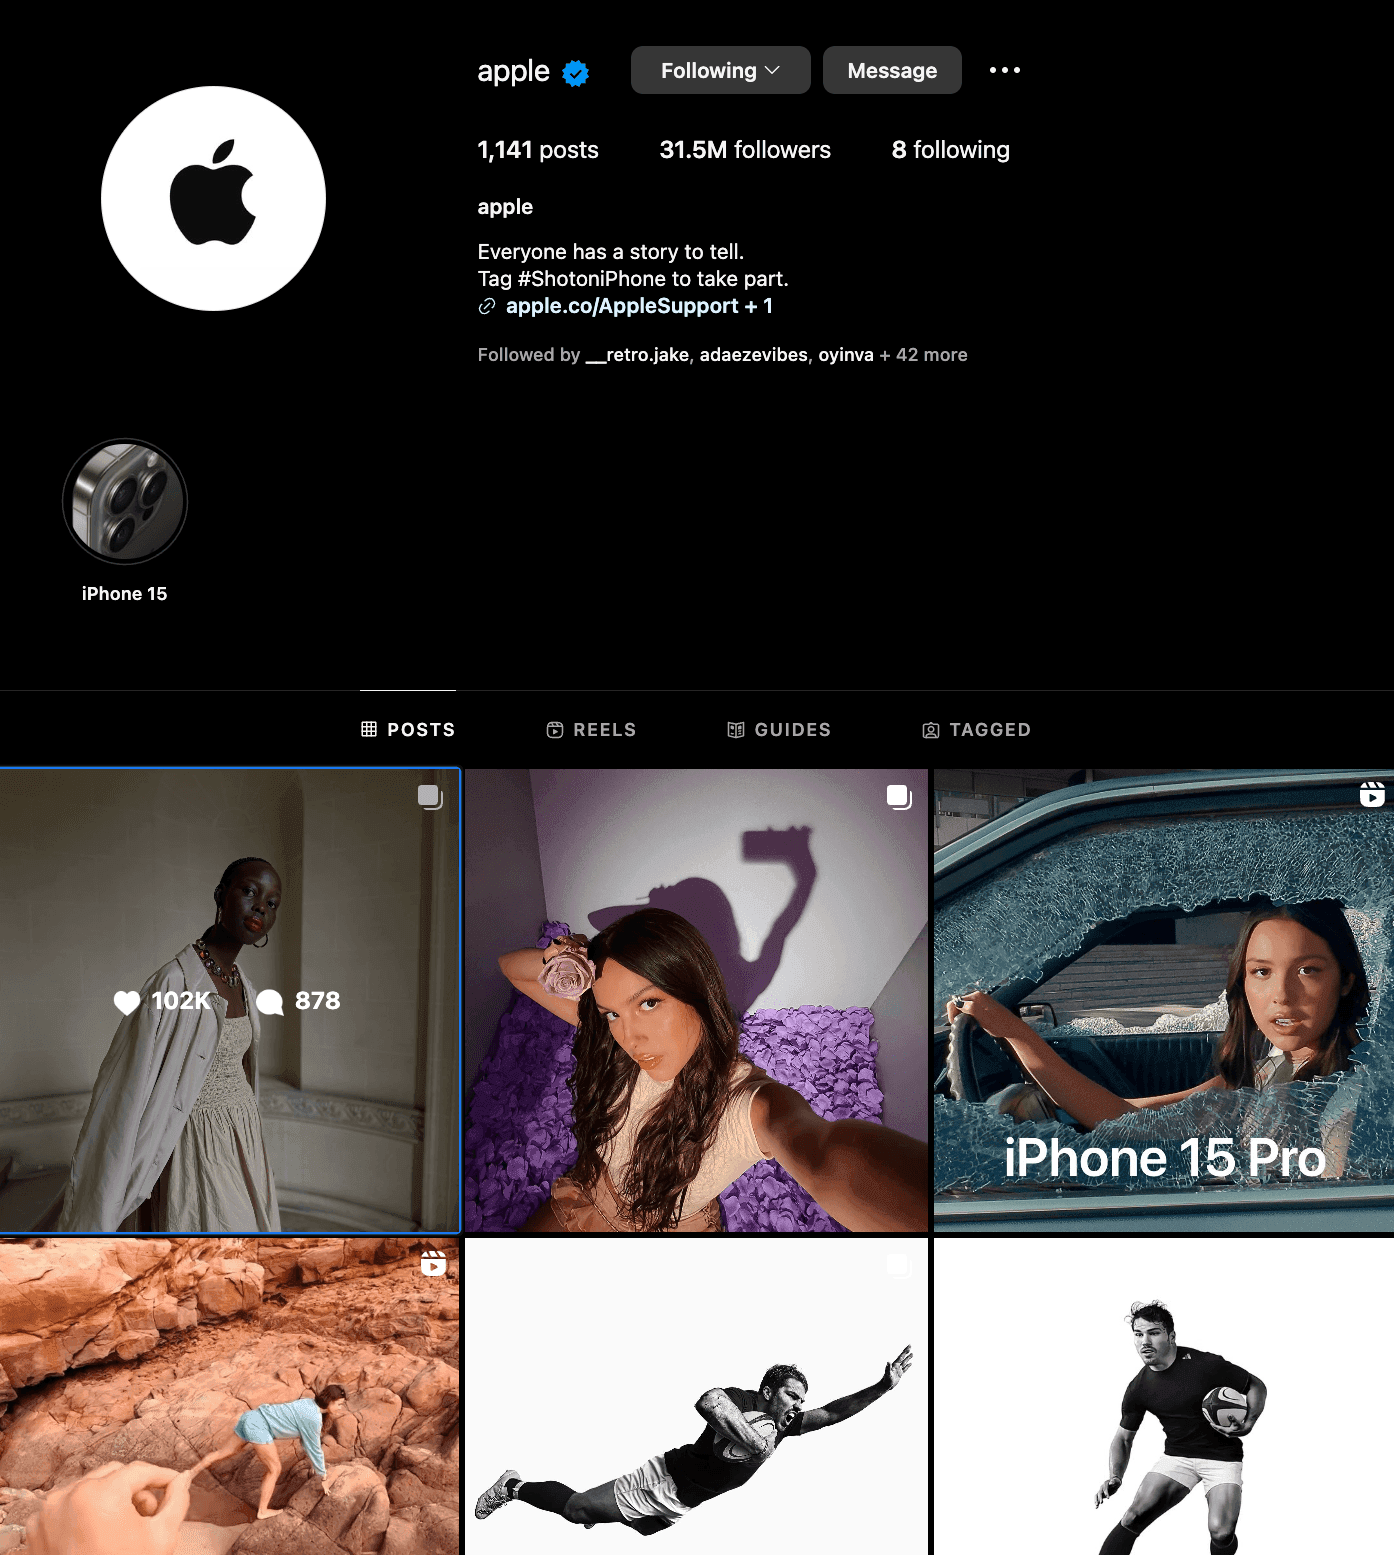 Apple's Instagram page with User-Generated Content (UGC)